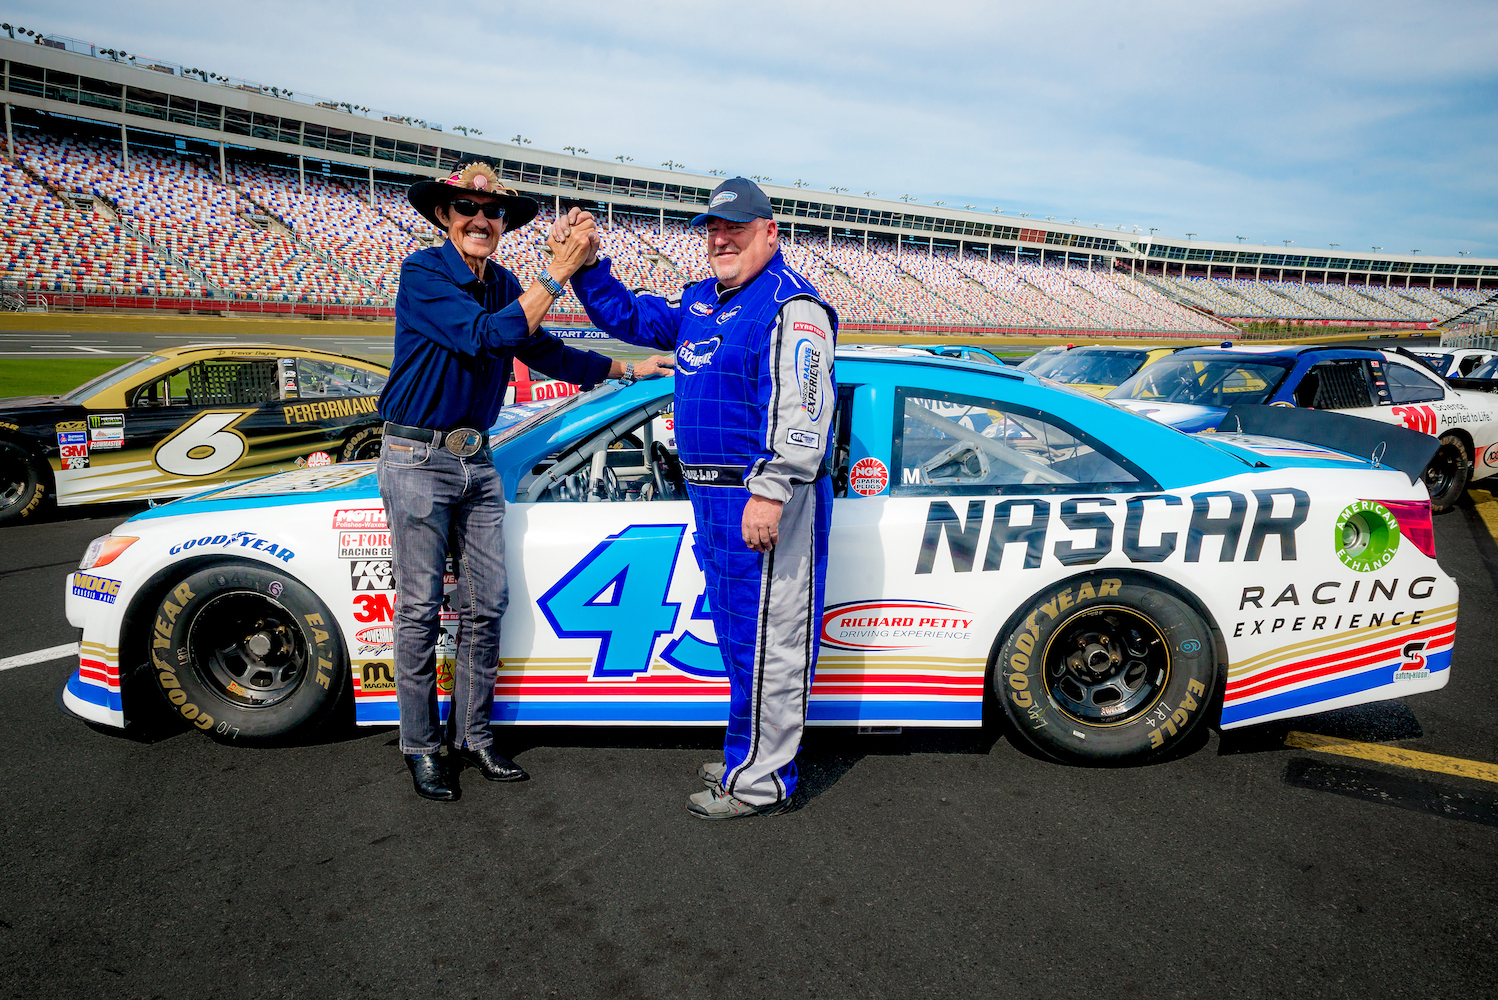 Return to Richard Petty Driving Experience- the true NASCAR Driving Experie...